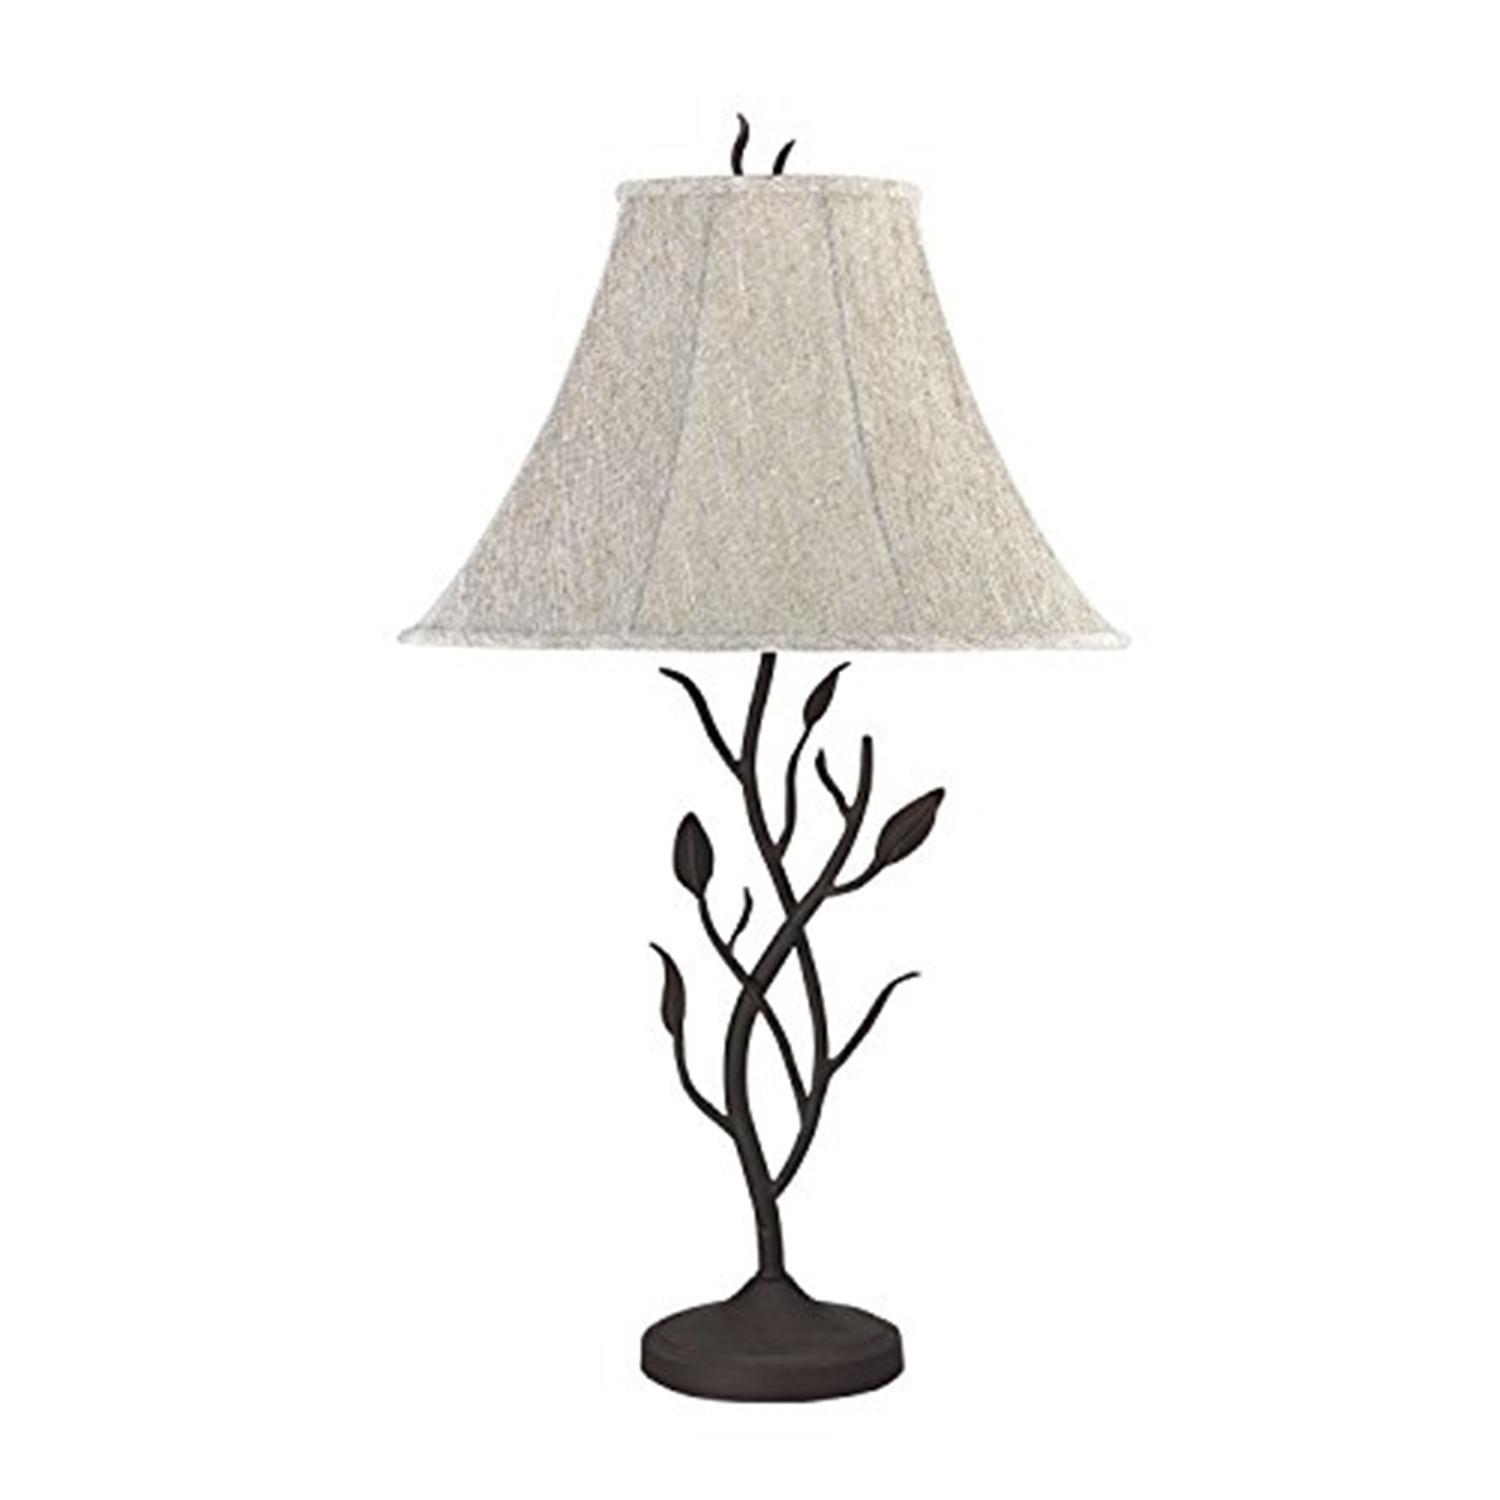 33 Height Metal Table Lamp in Black-Color:Grey White，Finish:Black，Style:Wrought iron，Wattage:150